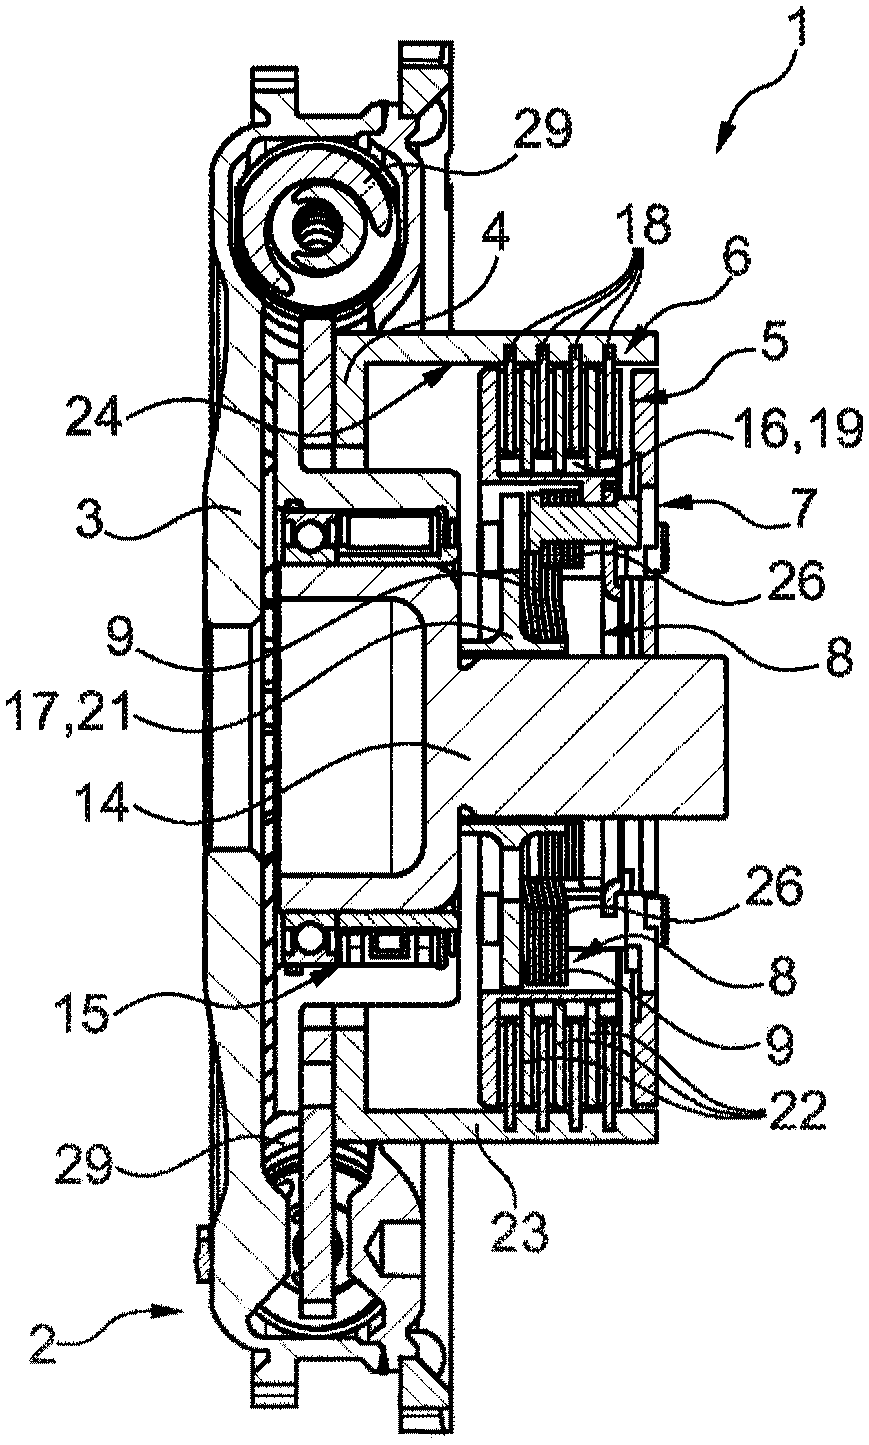 Clutch rotary vibration damper assembly having hybrid separating clutch integrated in rotating part of rotary vibration damper